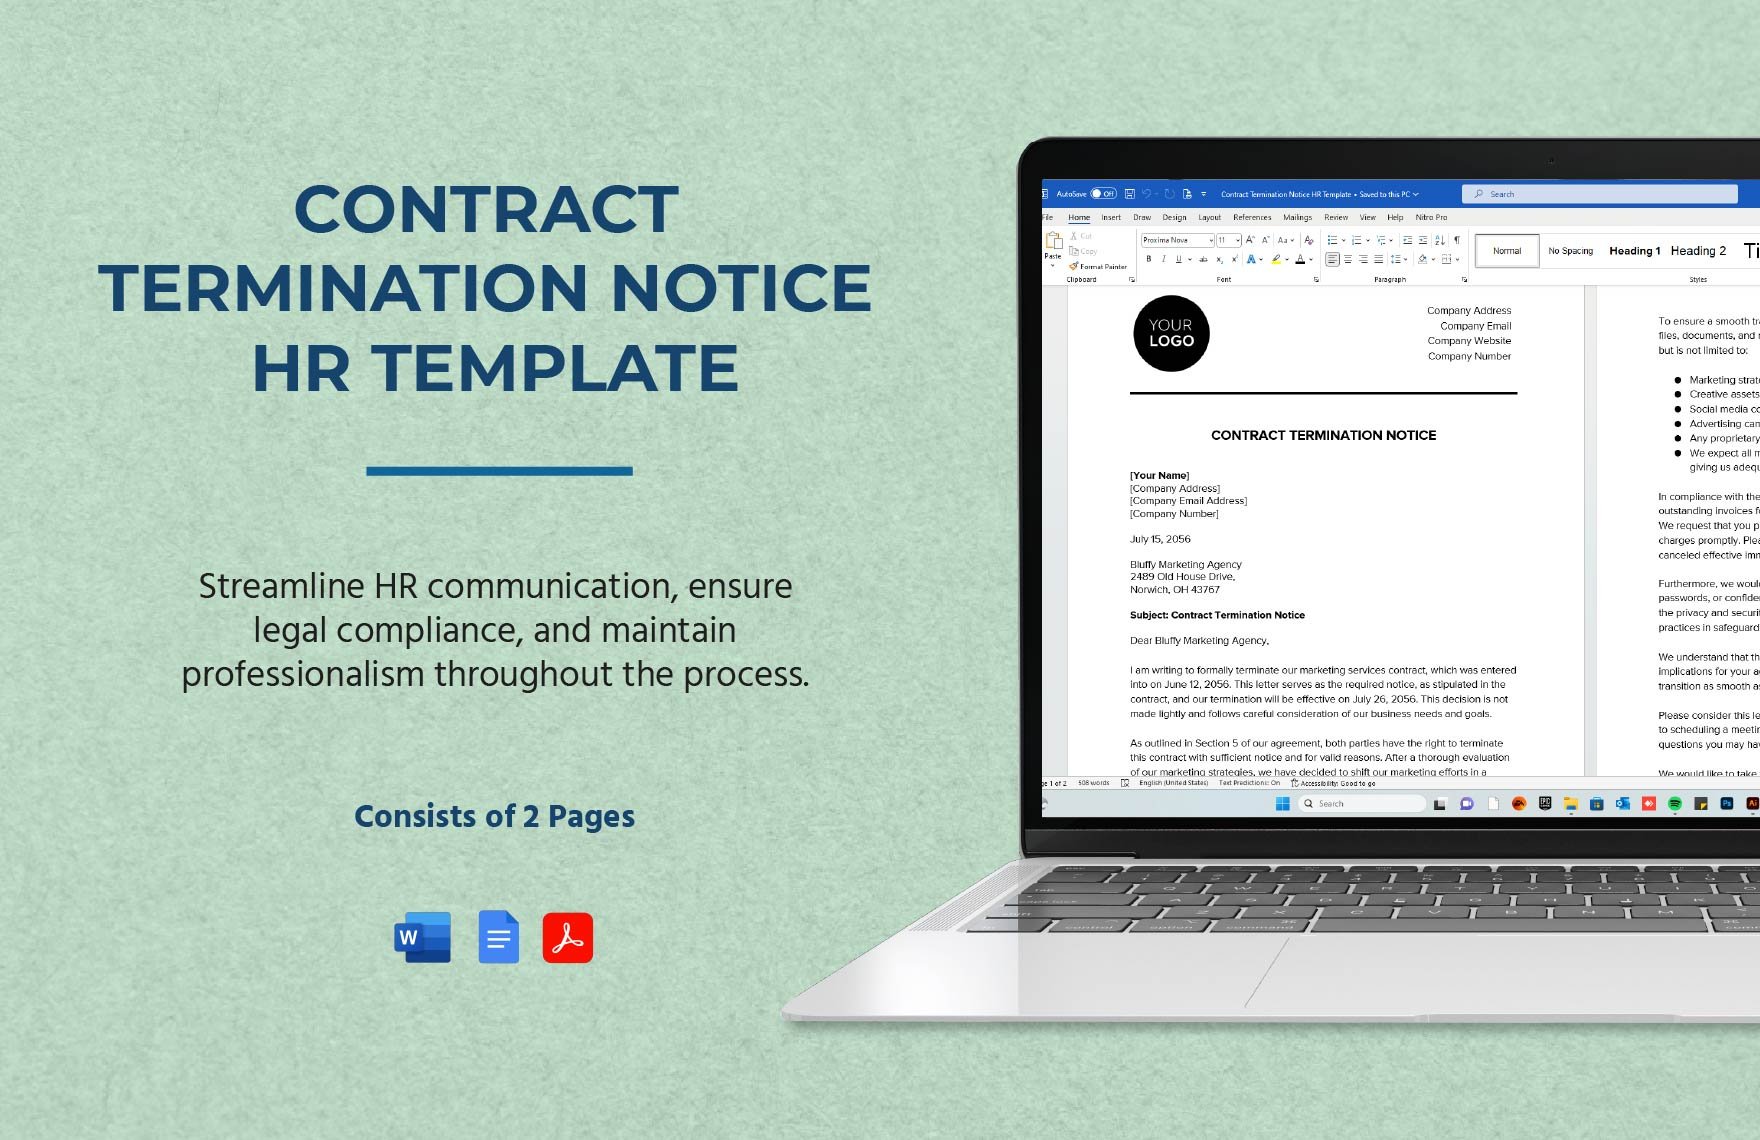 Contract Termination Notice HR Template in Word, Google Docs, PDF